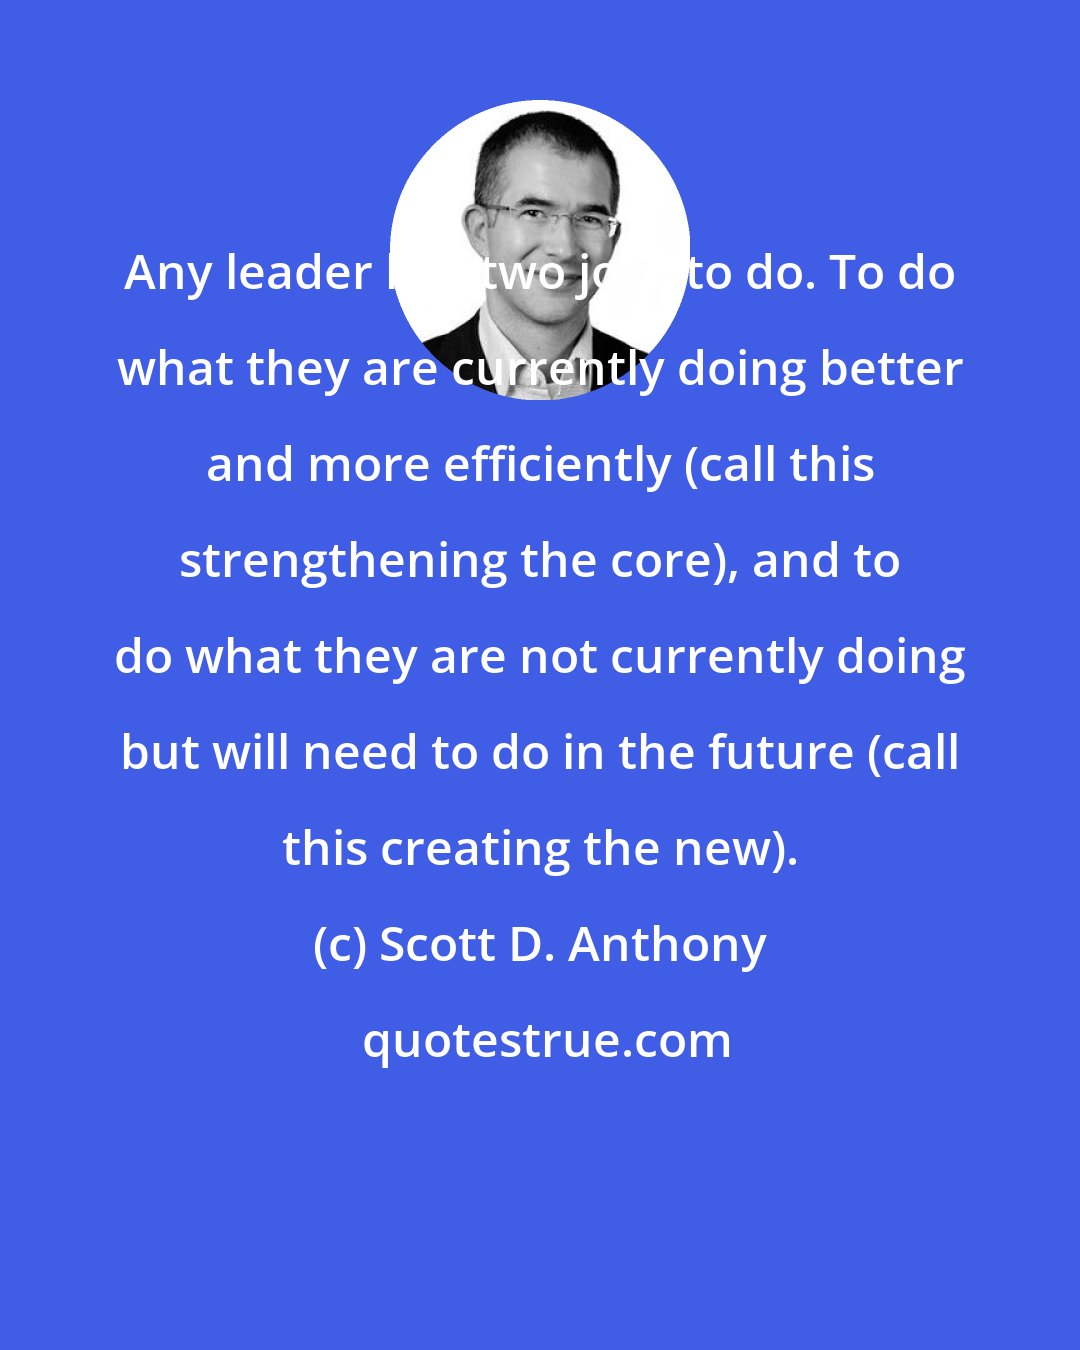 Scott D. Anthony: Any leader has two jobs to do. To do what they are currently doing better and more efficiently (call this strengthening the core), and to do what they are not currently doing but will need to do in the future (call this creating the new).